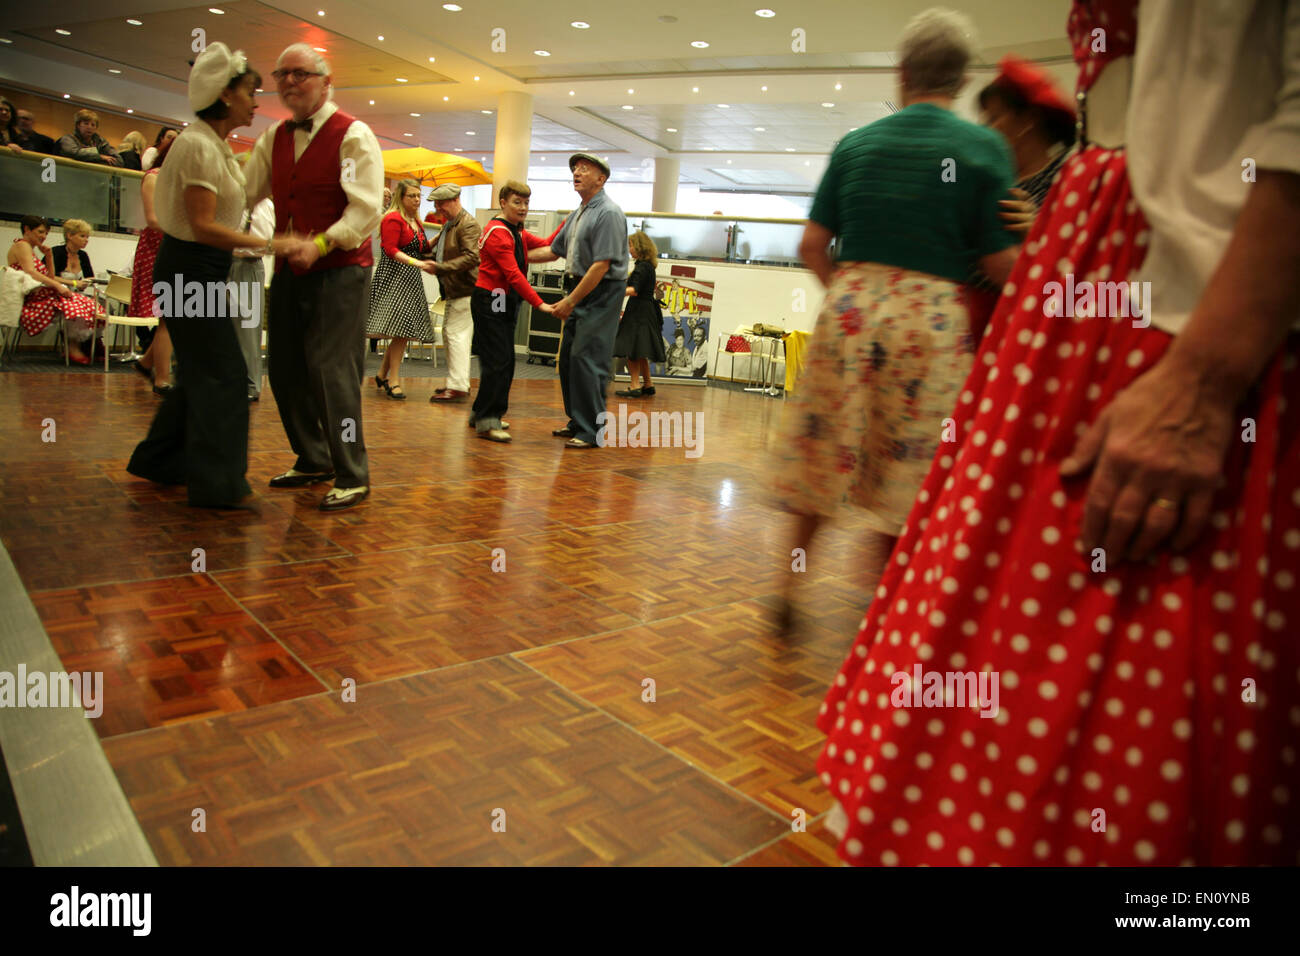 York, UK, 25 April 2015. Visitors in period dress dance to classic jive and swing songs at the Festival of Vintage at York Racecourse: an event showcasing and celebrating the fashion, beauty, cars, motorcycles, music and lifestyle from the 1930's to 1960's. Credit:  david soulsby/Alamy Live News Stock Photo